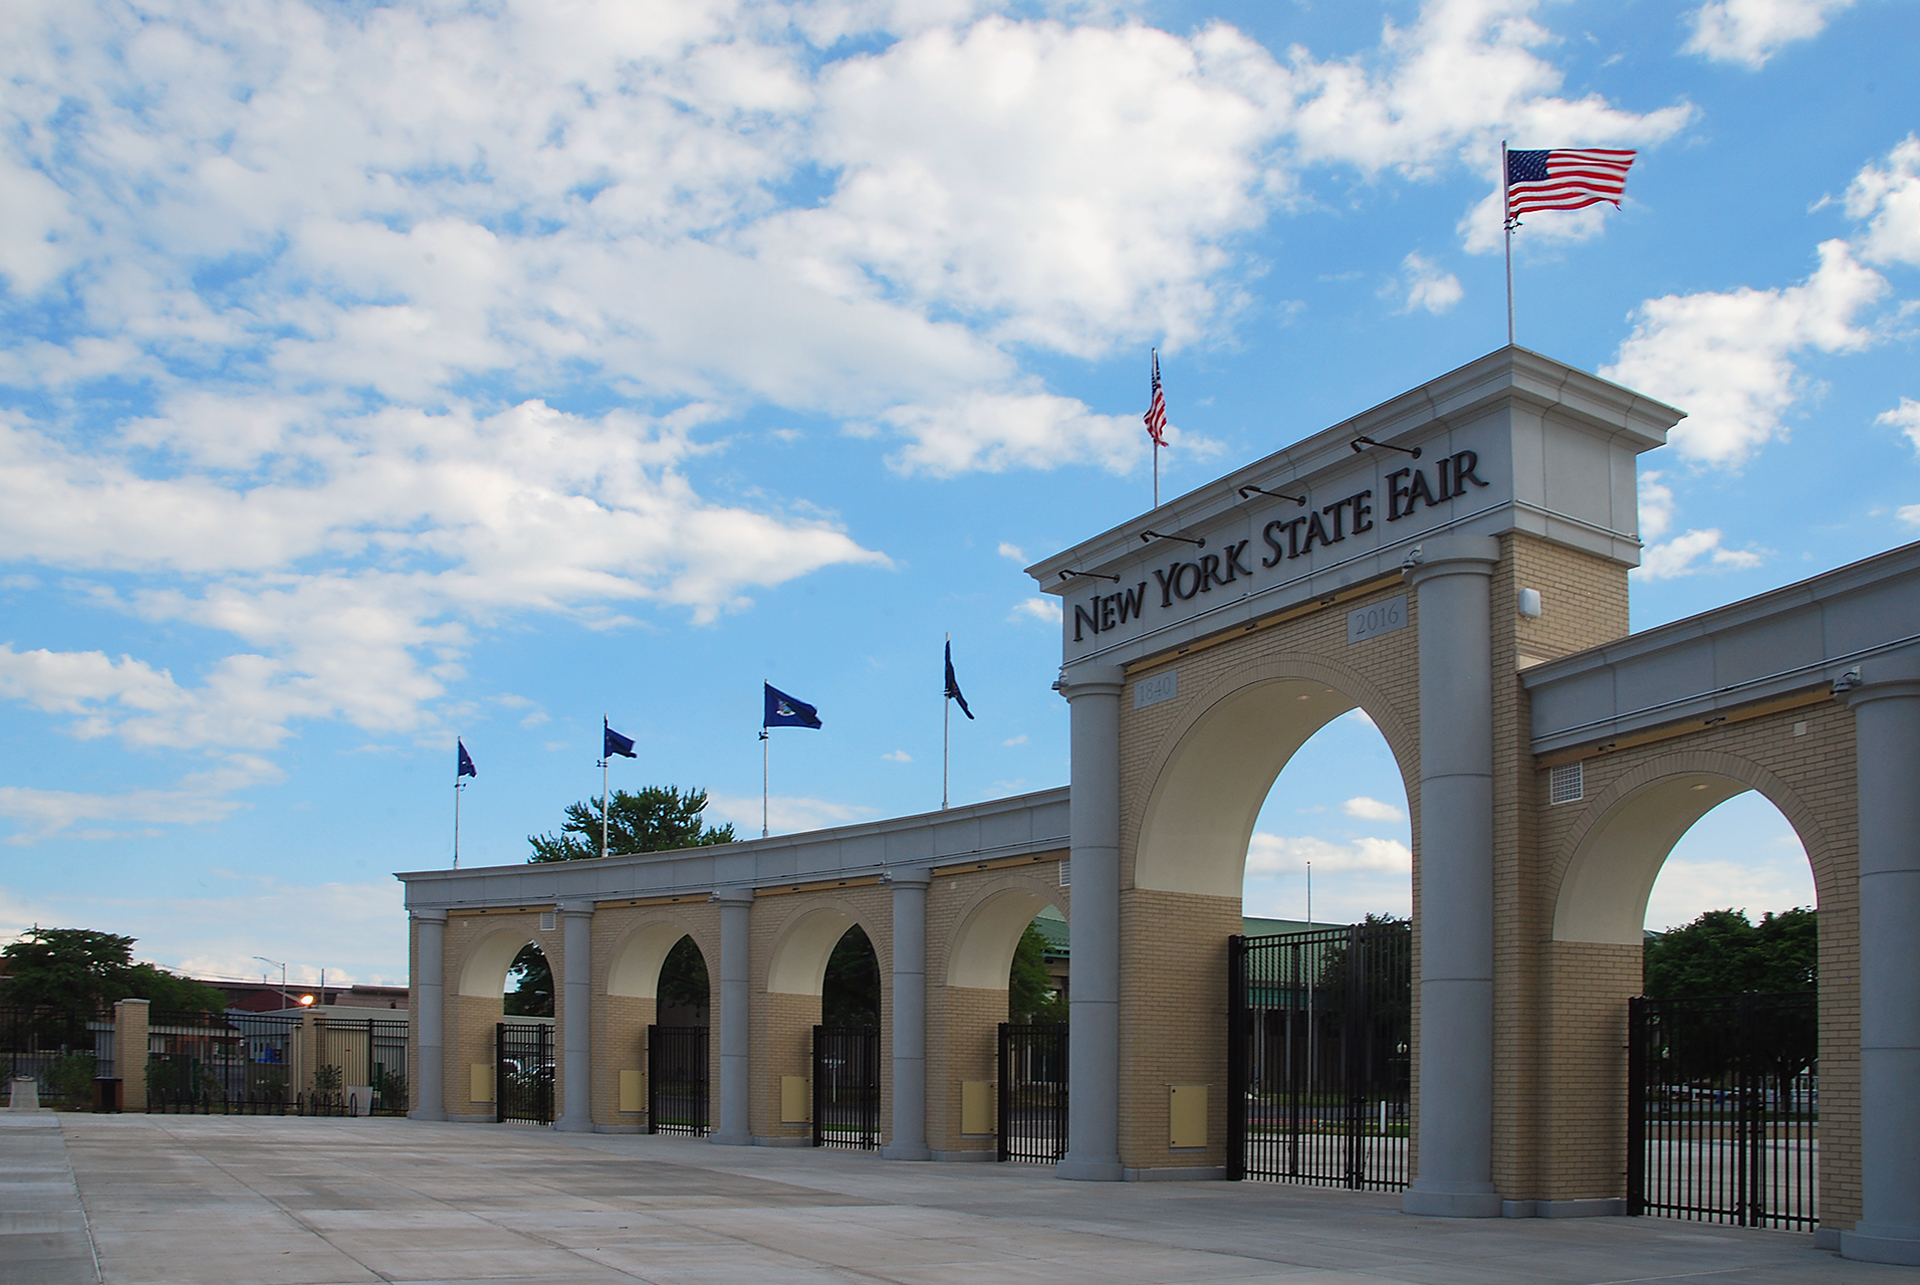 Main Gate at New York State Fairgrounds - NV5